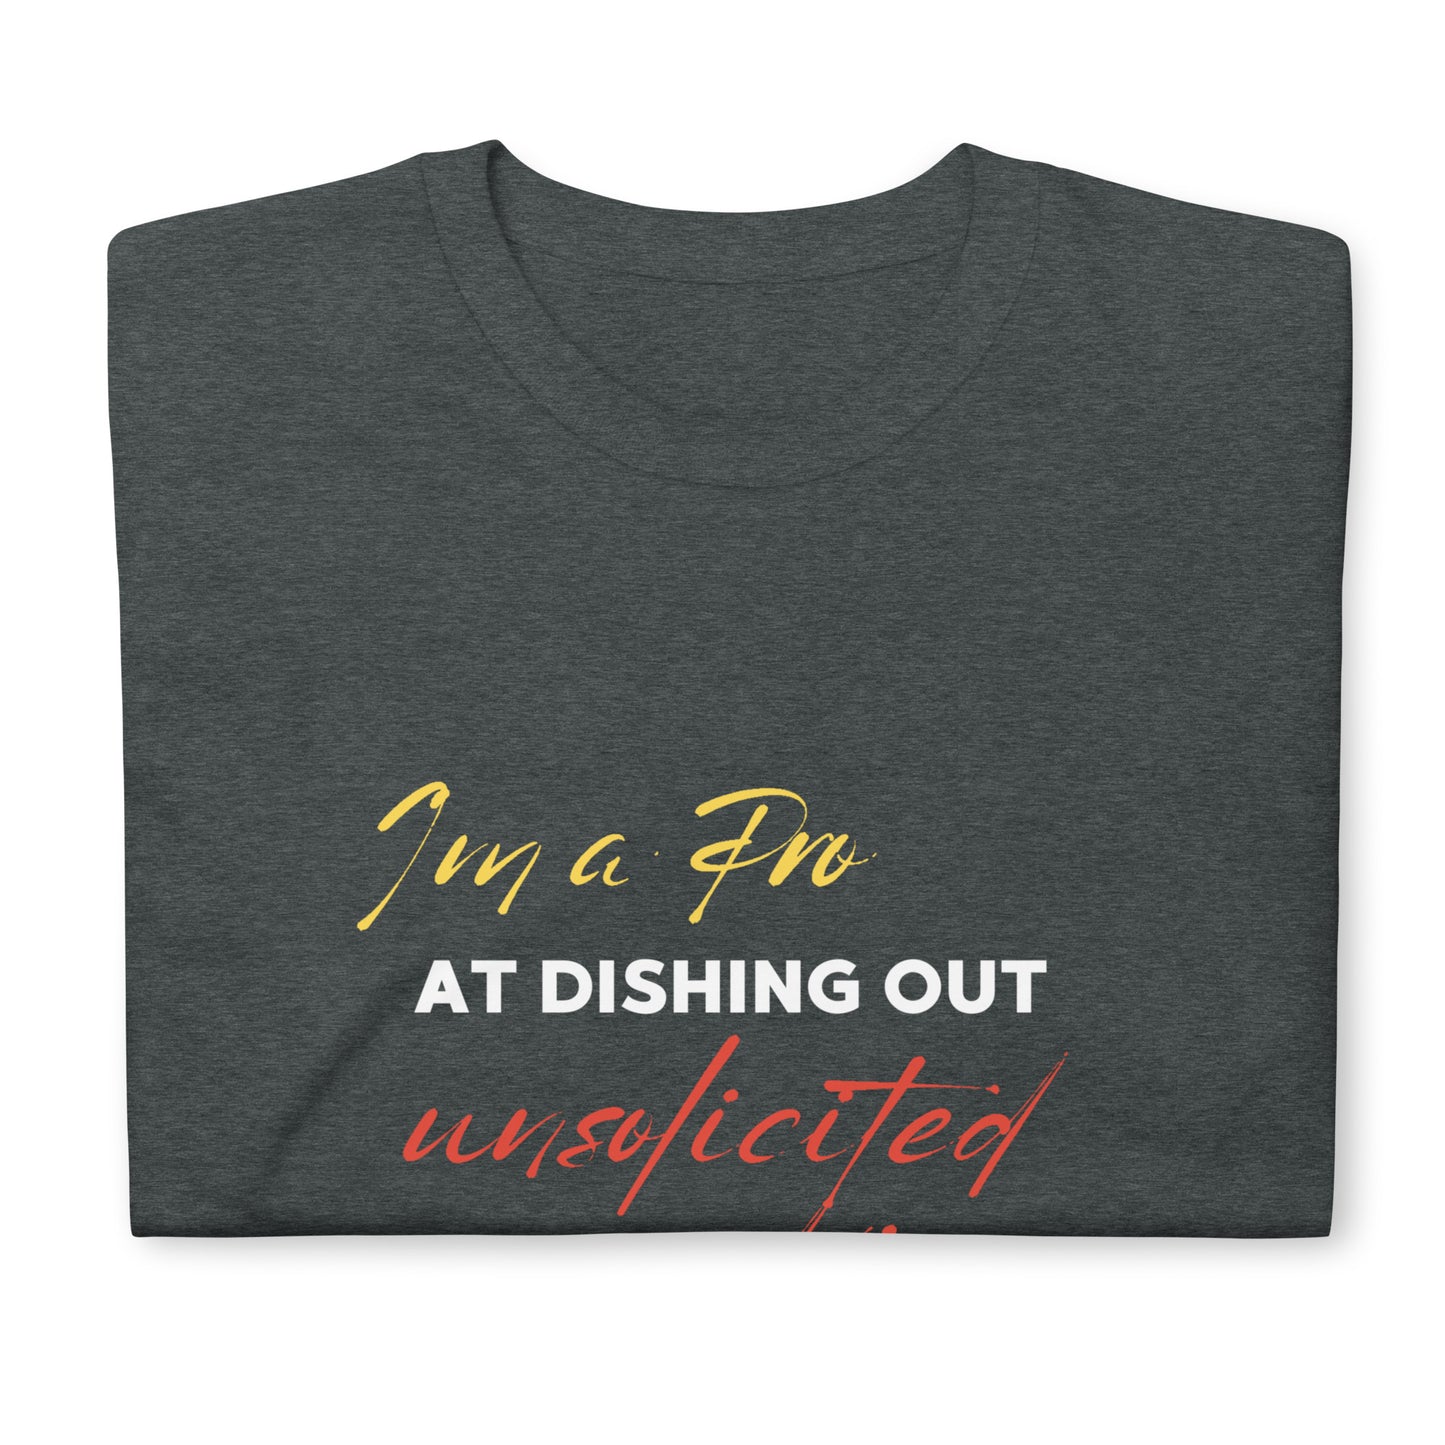 Pro at Unsolicited Advice Short-Sleeve Unisex T-Shirt